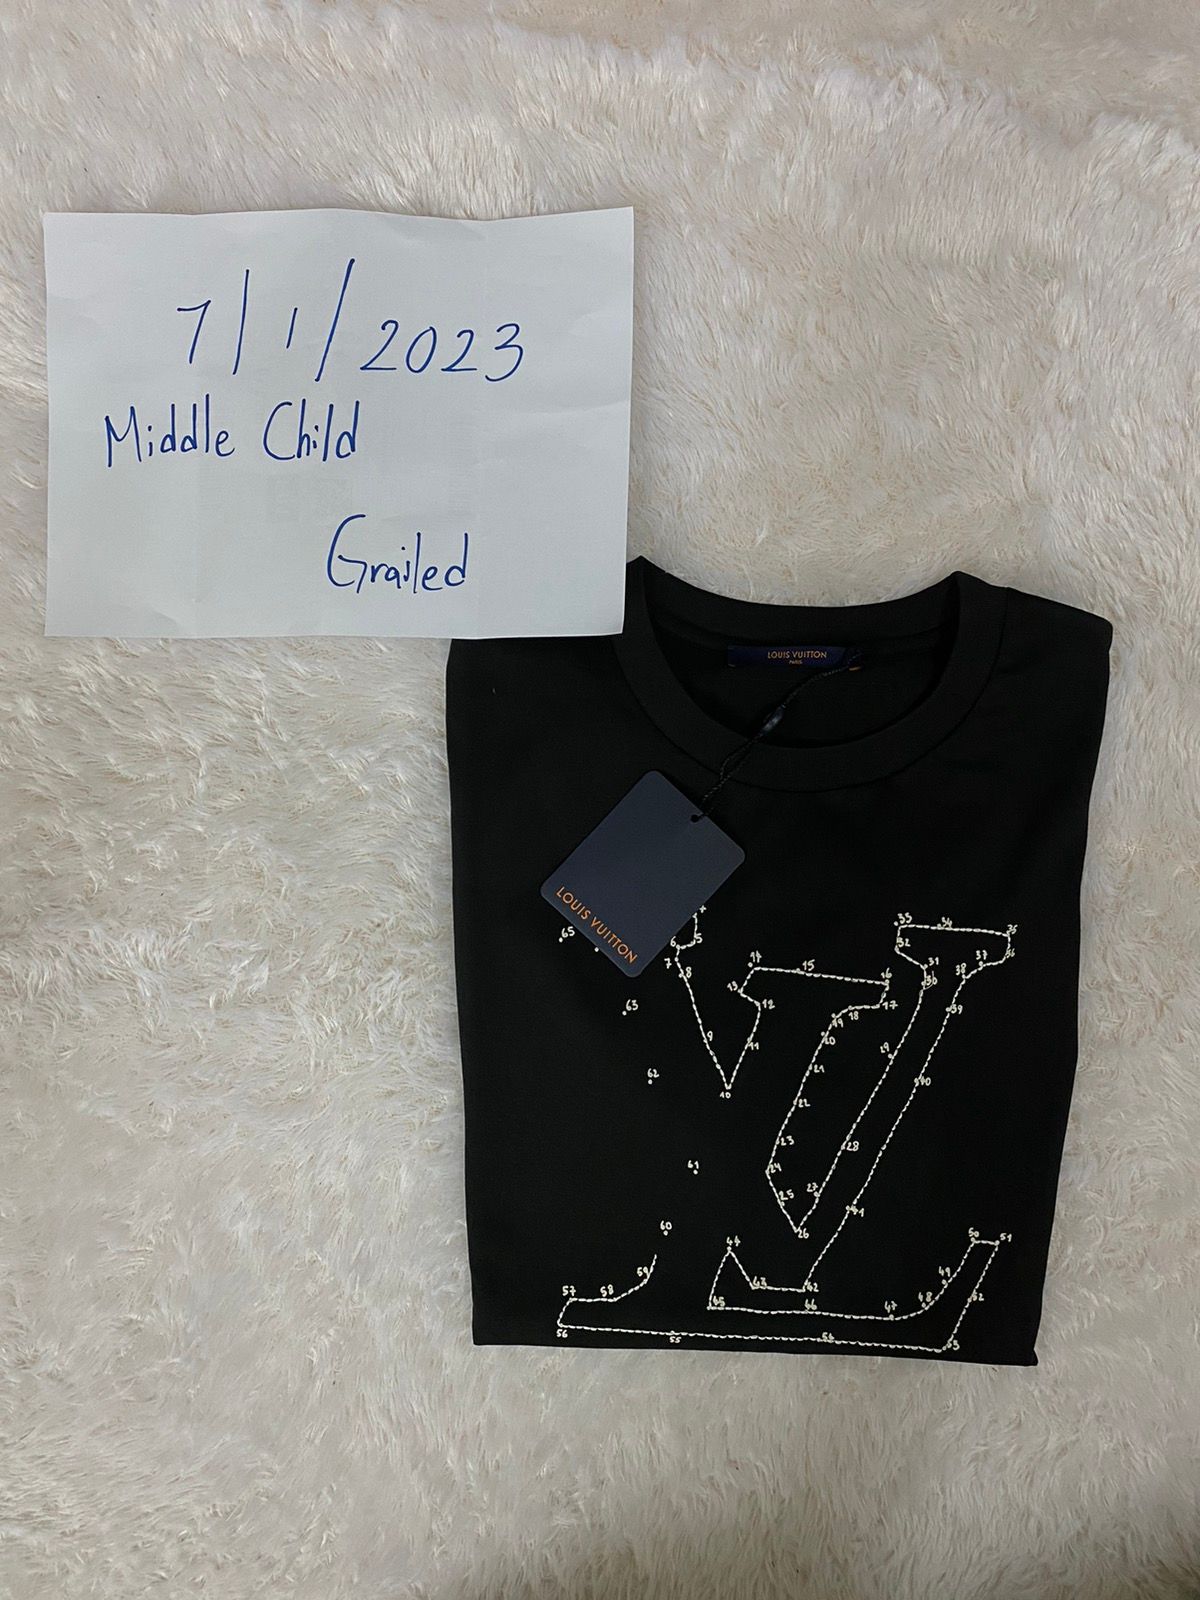 LV STITCH PRINT AND EMBROIDERED T-SHIRT , RRP